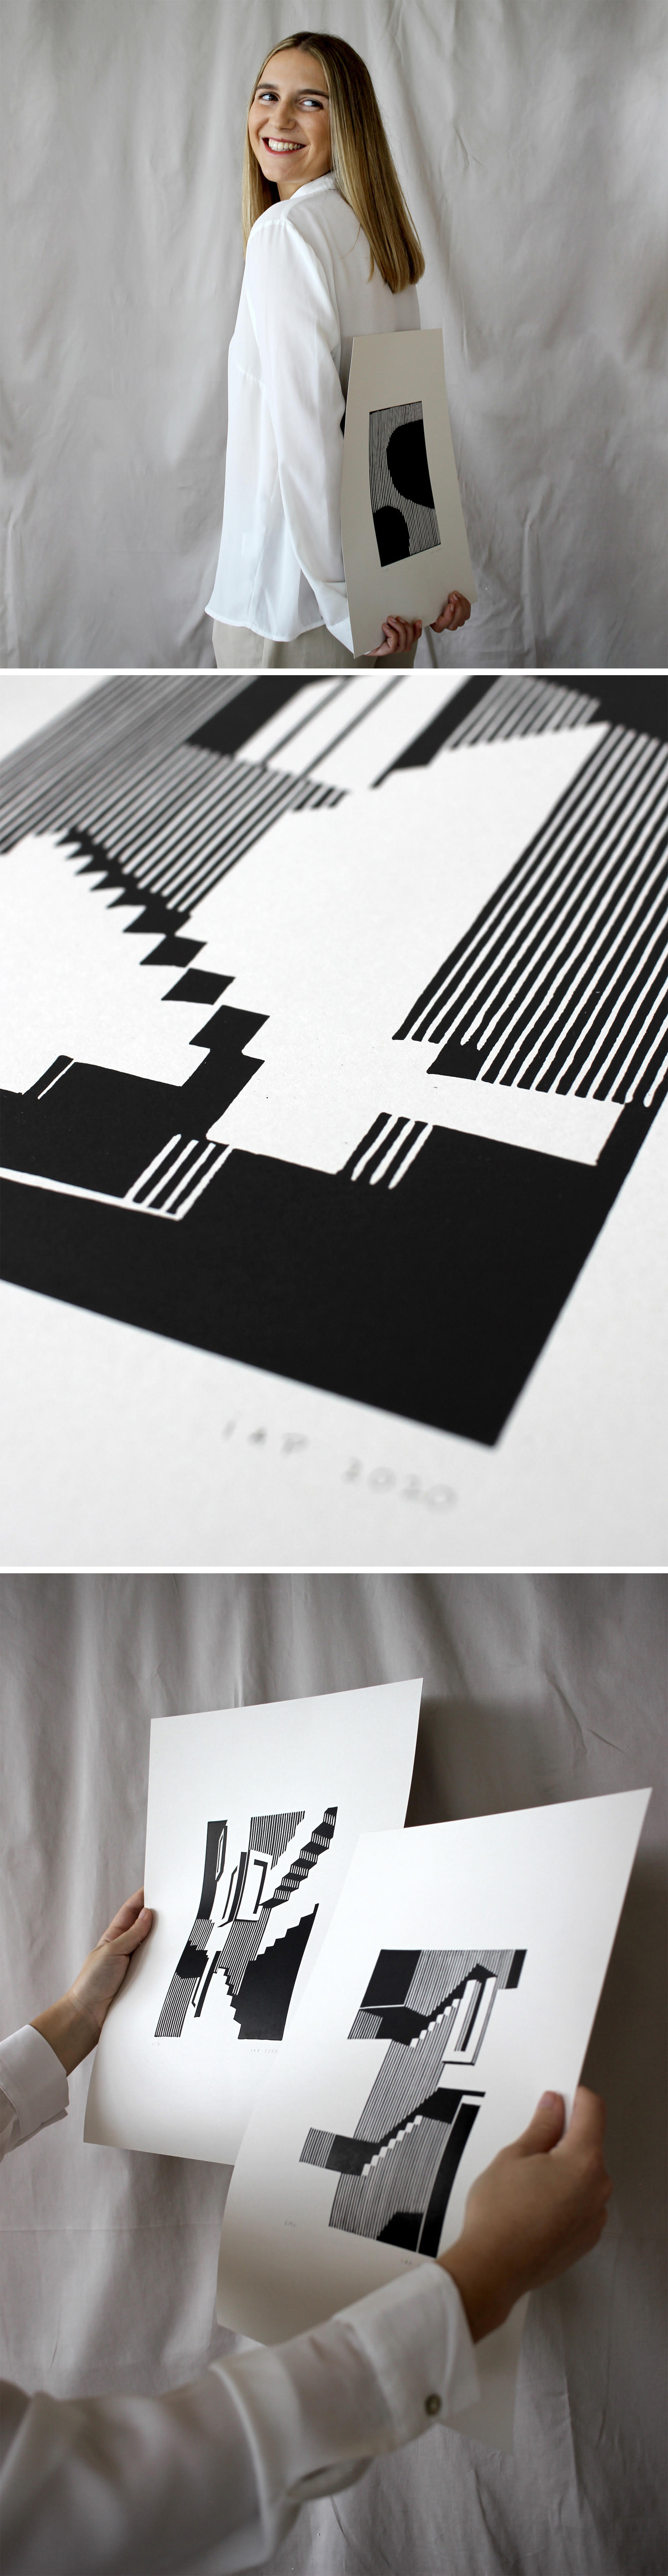 Minimalist architecture-inspired prints created by fresca studio.